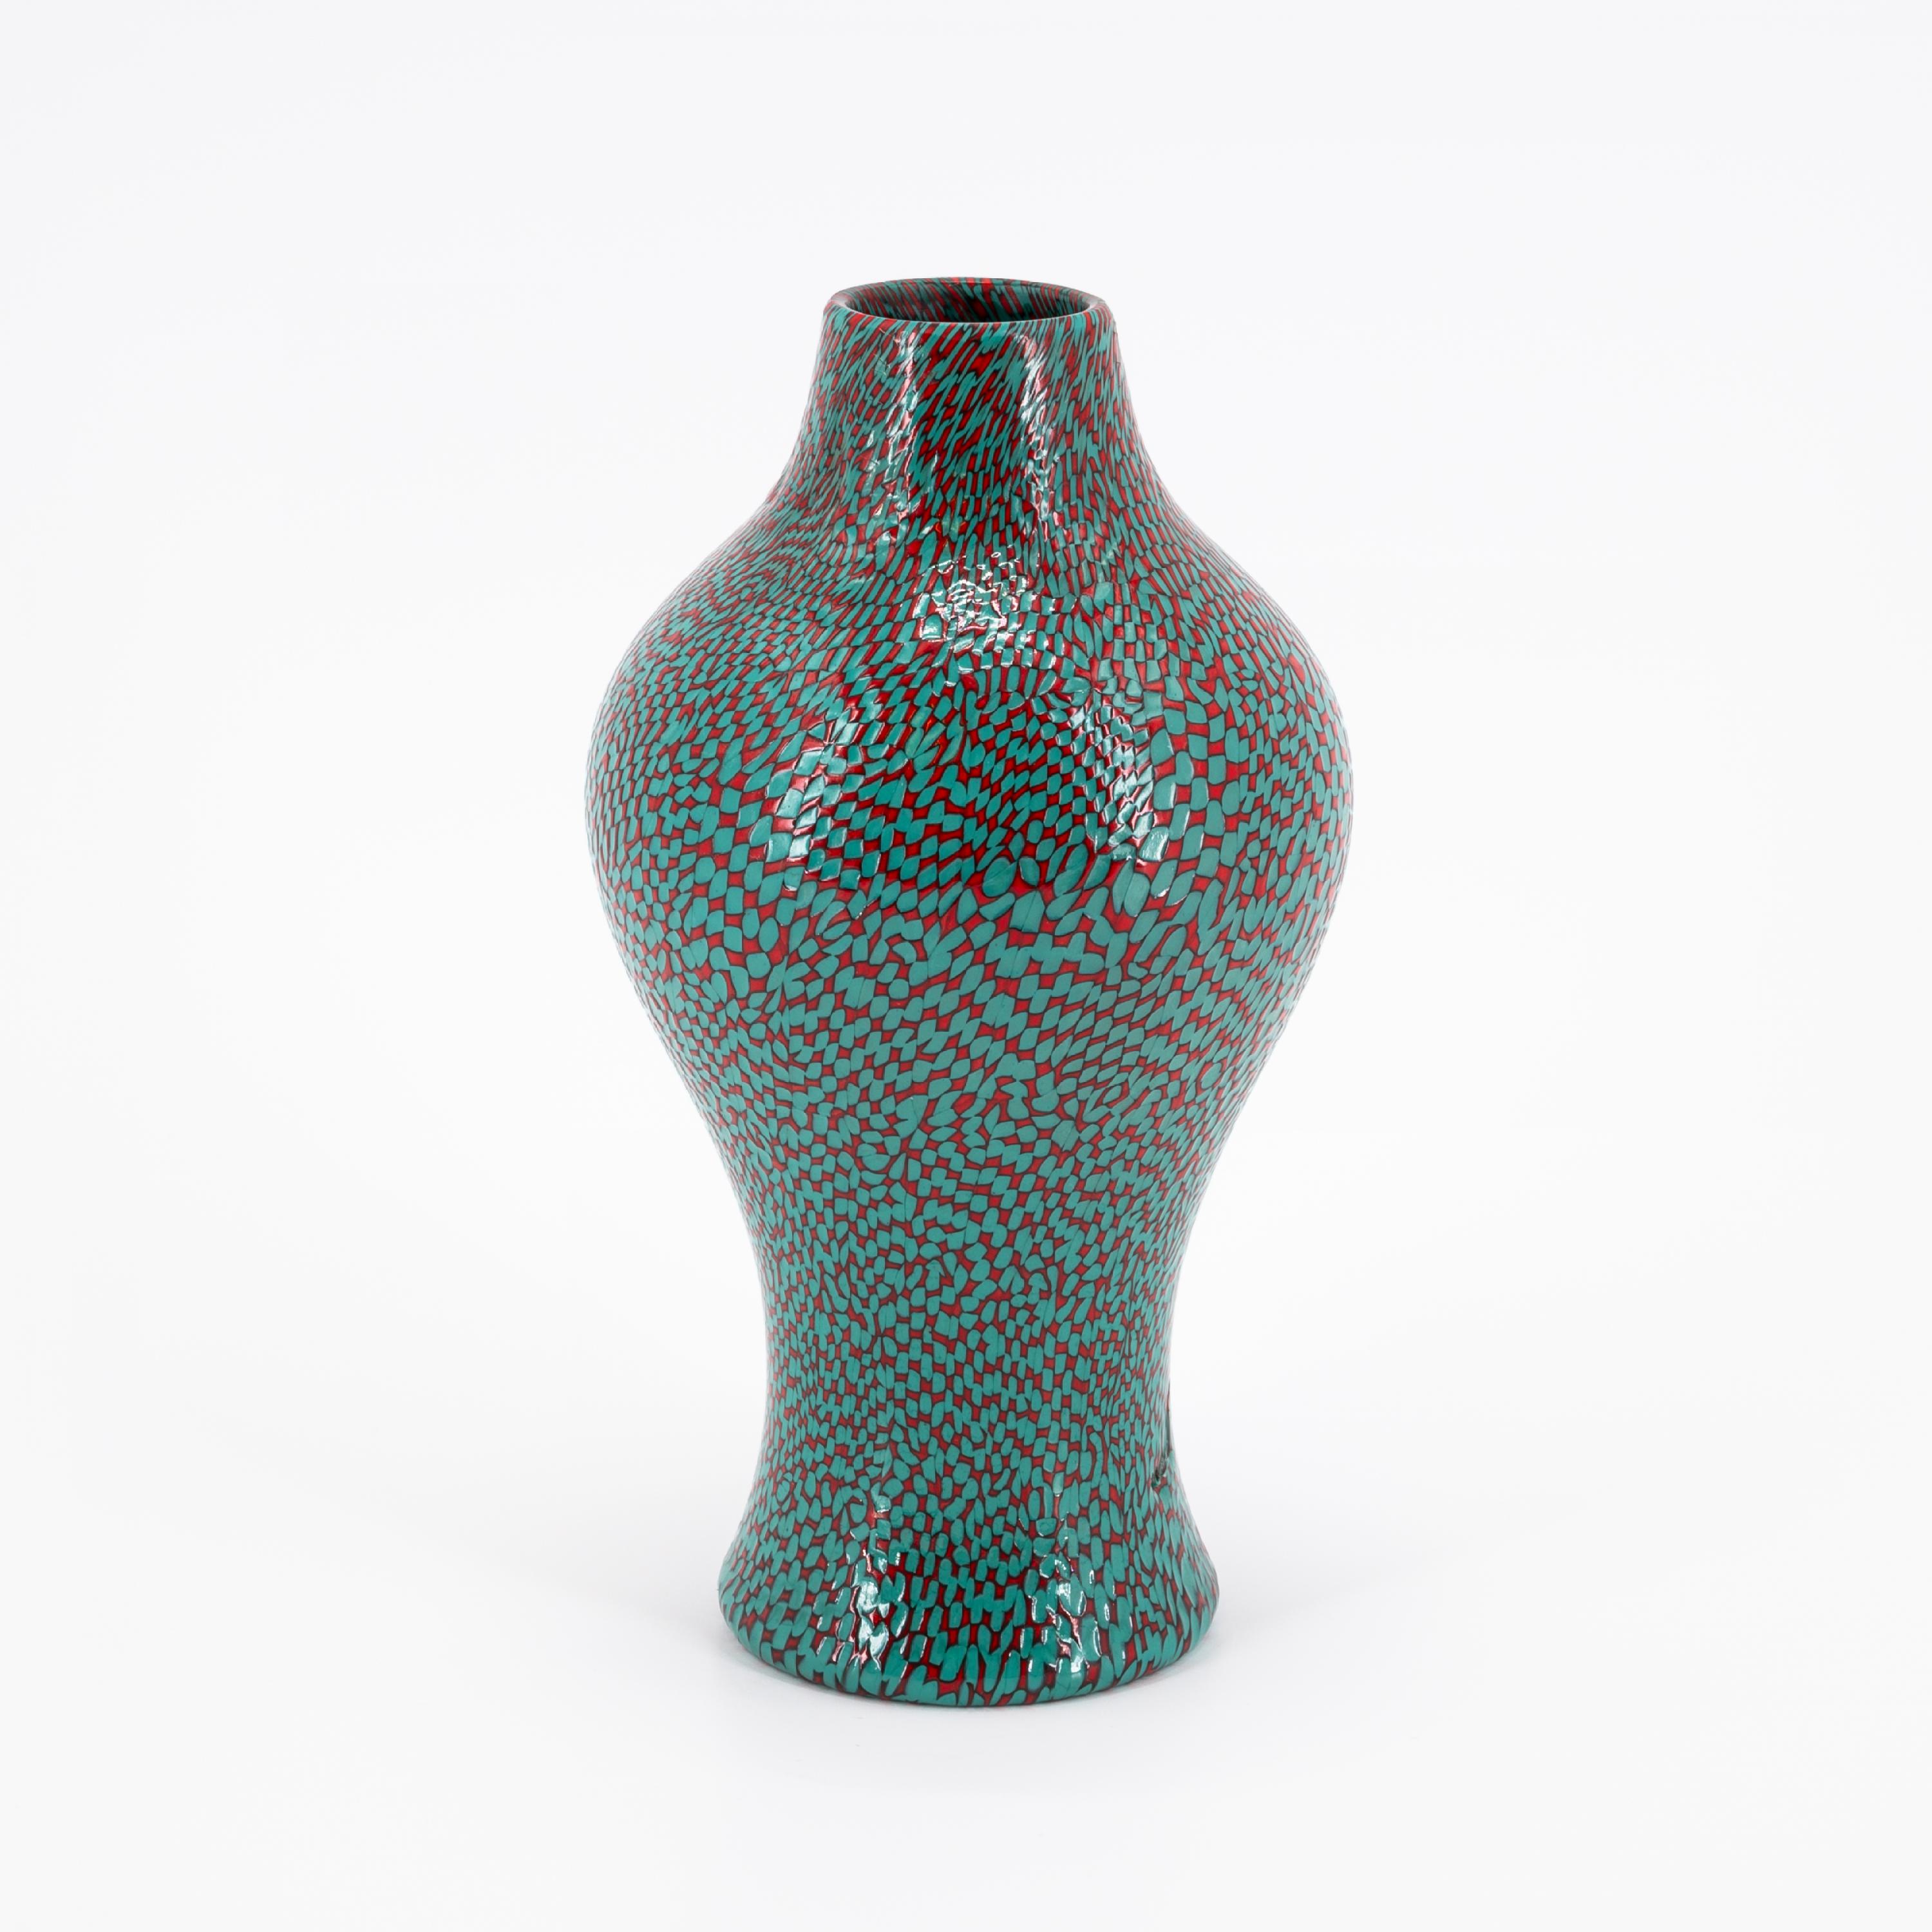 GLASS VASE WITH DeCOR 'A DAMA' - Image 5 of 7